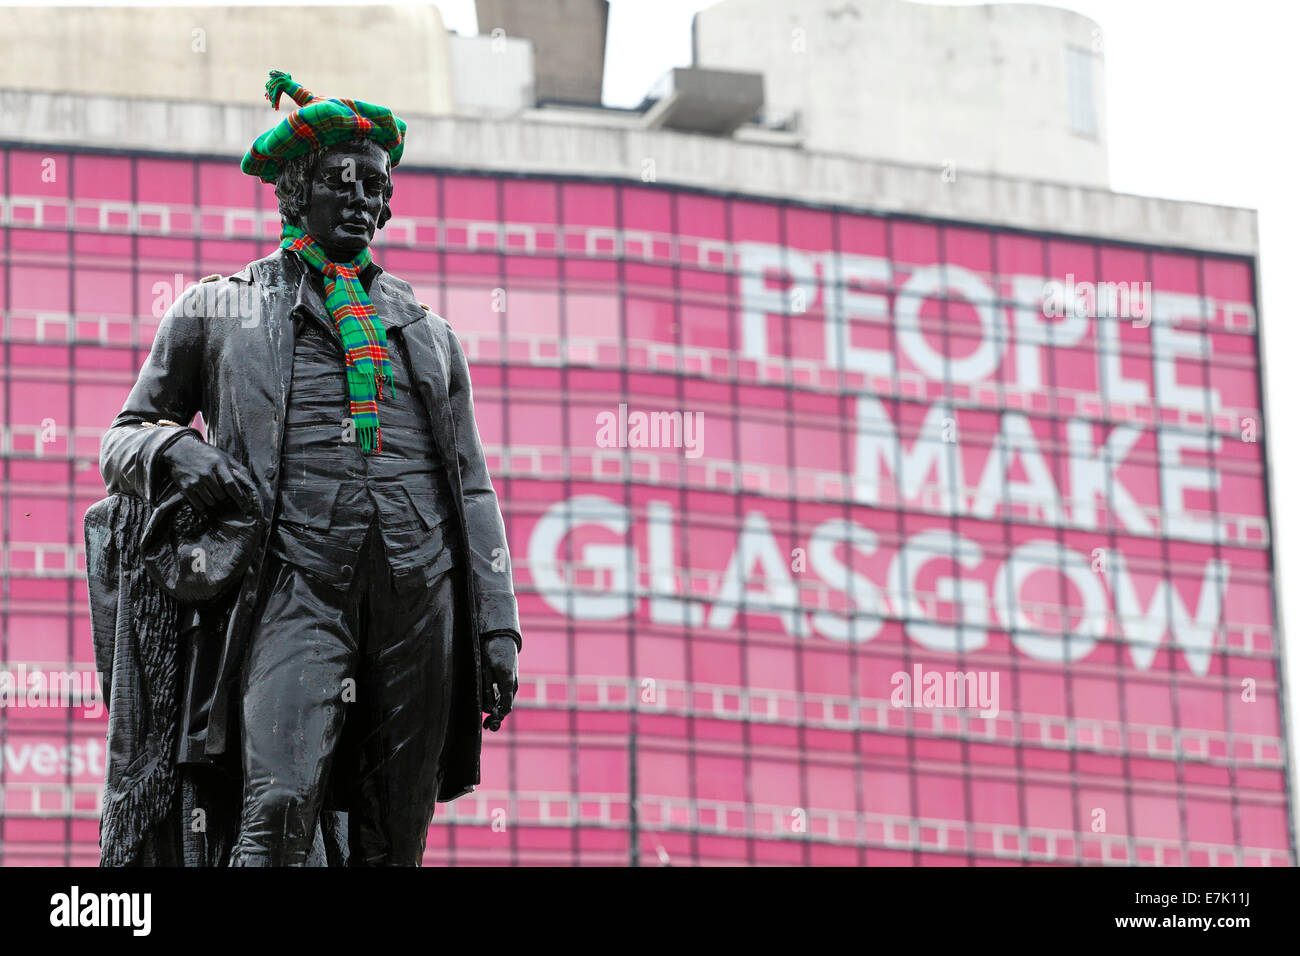 A statue of Scottish poet Robert Burns decorated with a tartan hat and scarf in front of the People Make Glasgow sign, George Square, Glasgow, Scotland, UK Stock Photo